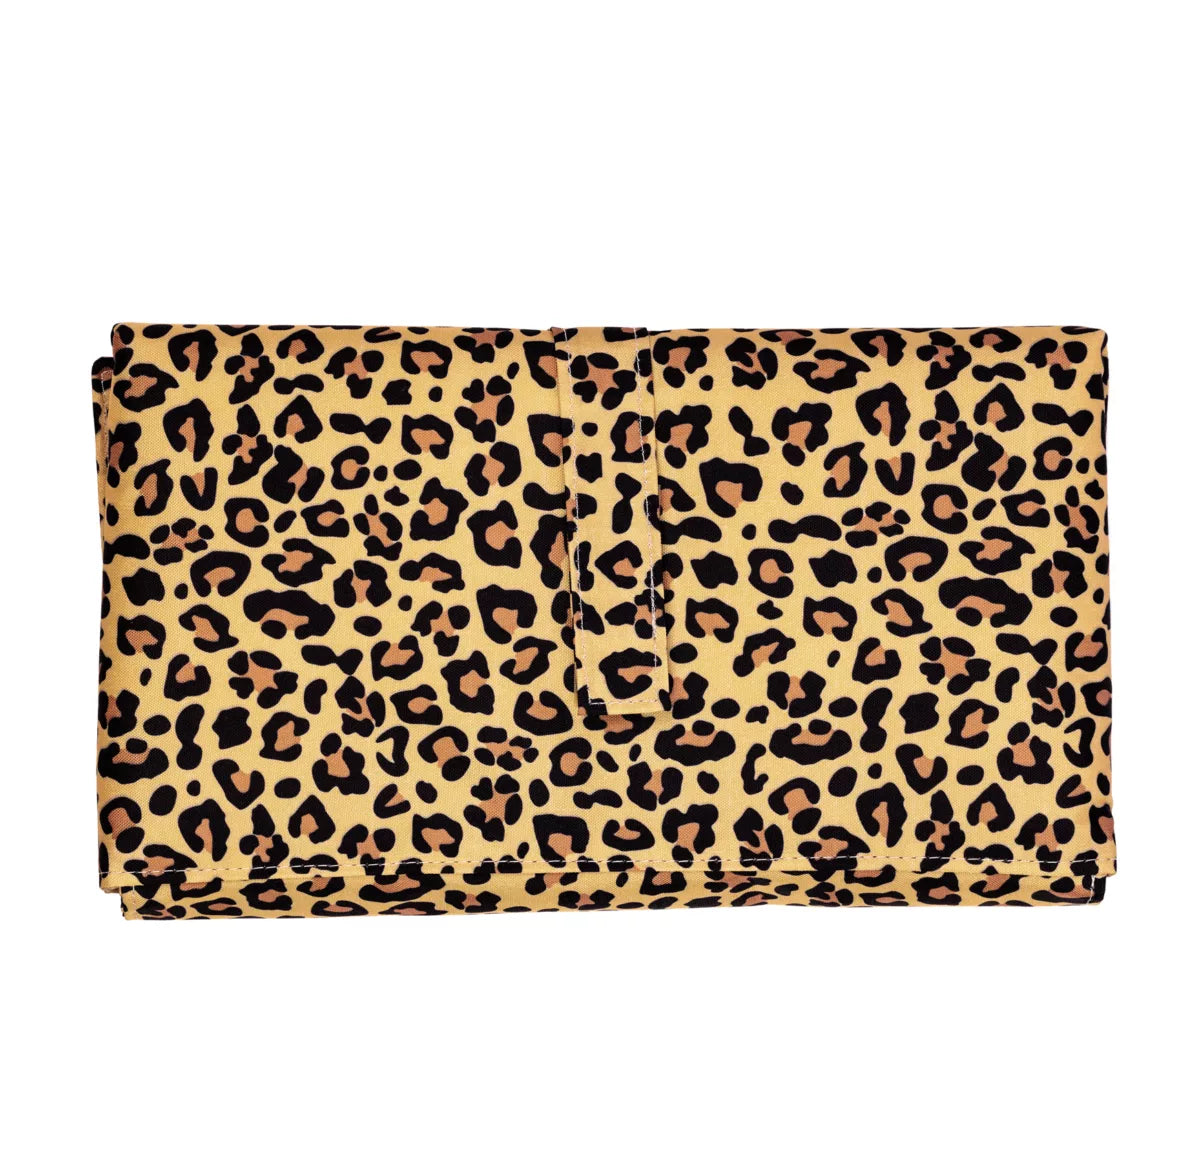 Jeankelly Changing Clutch – Leopard Print